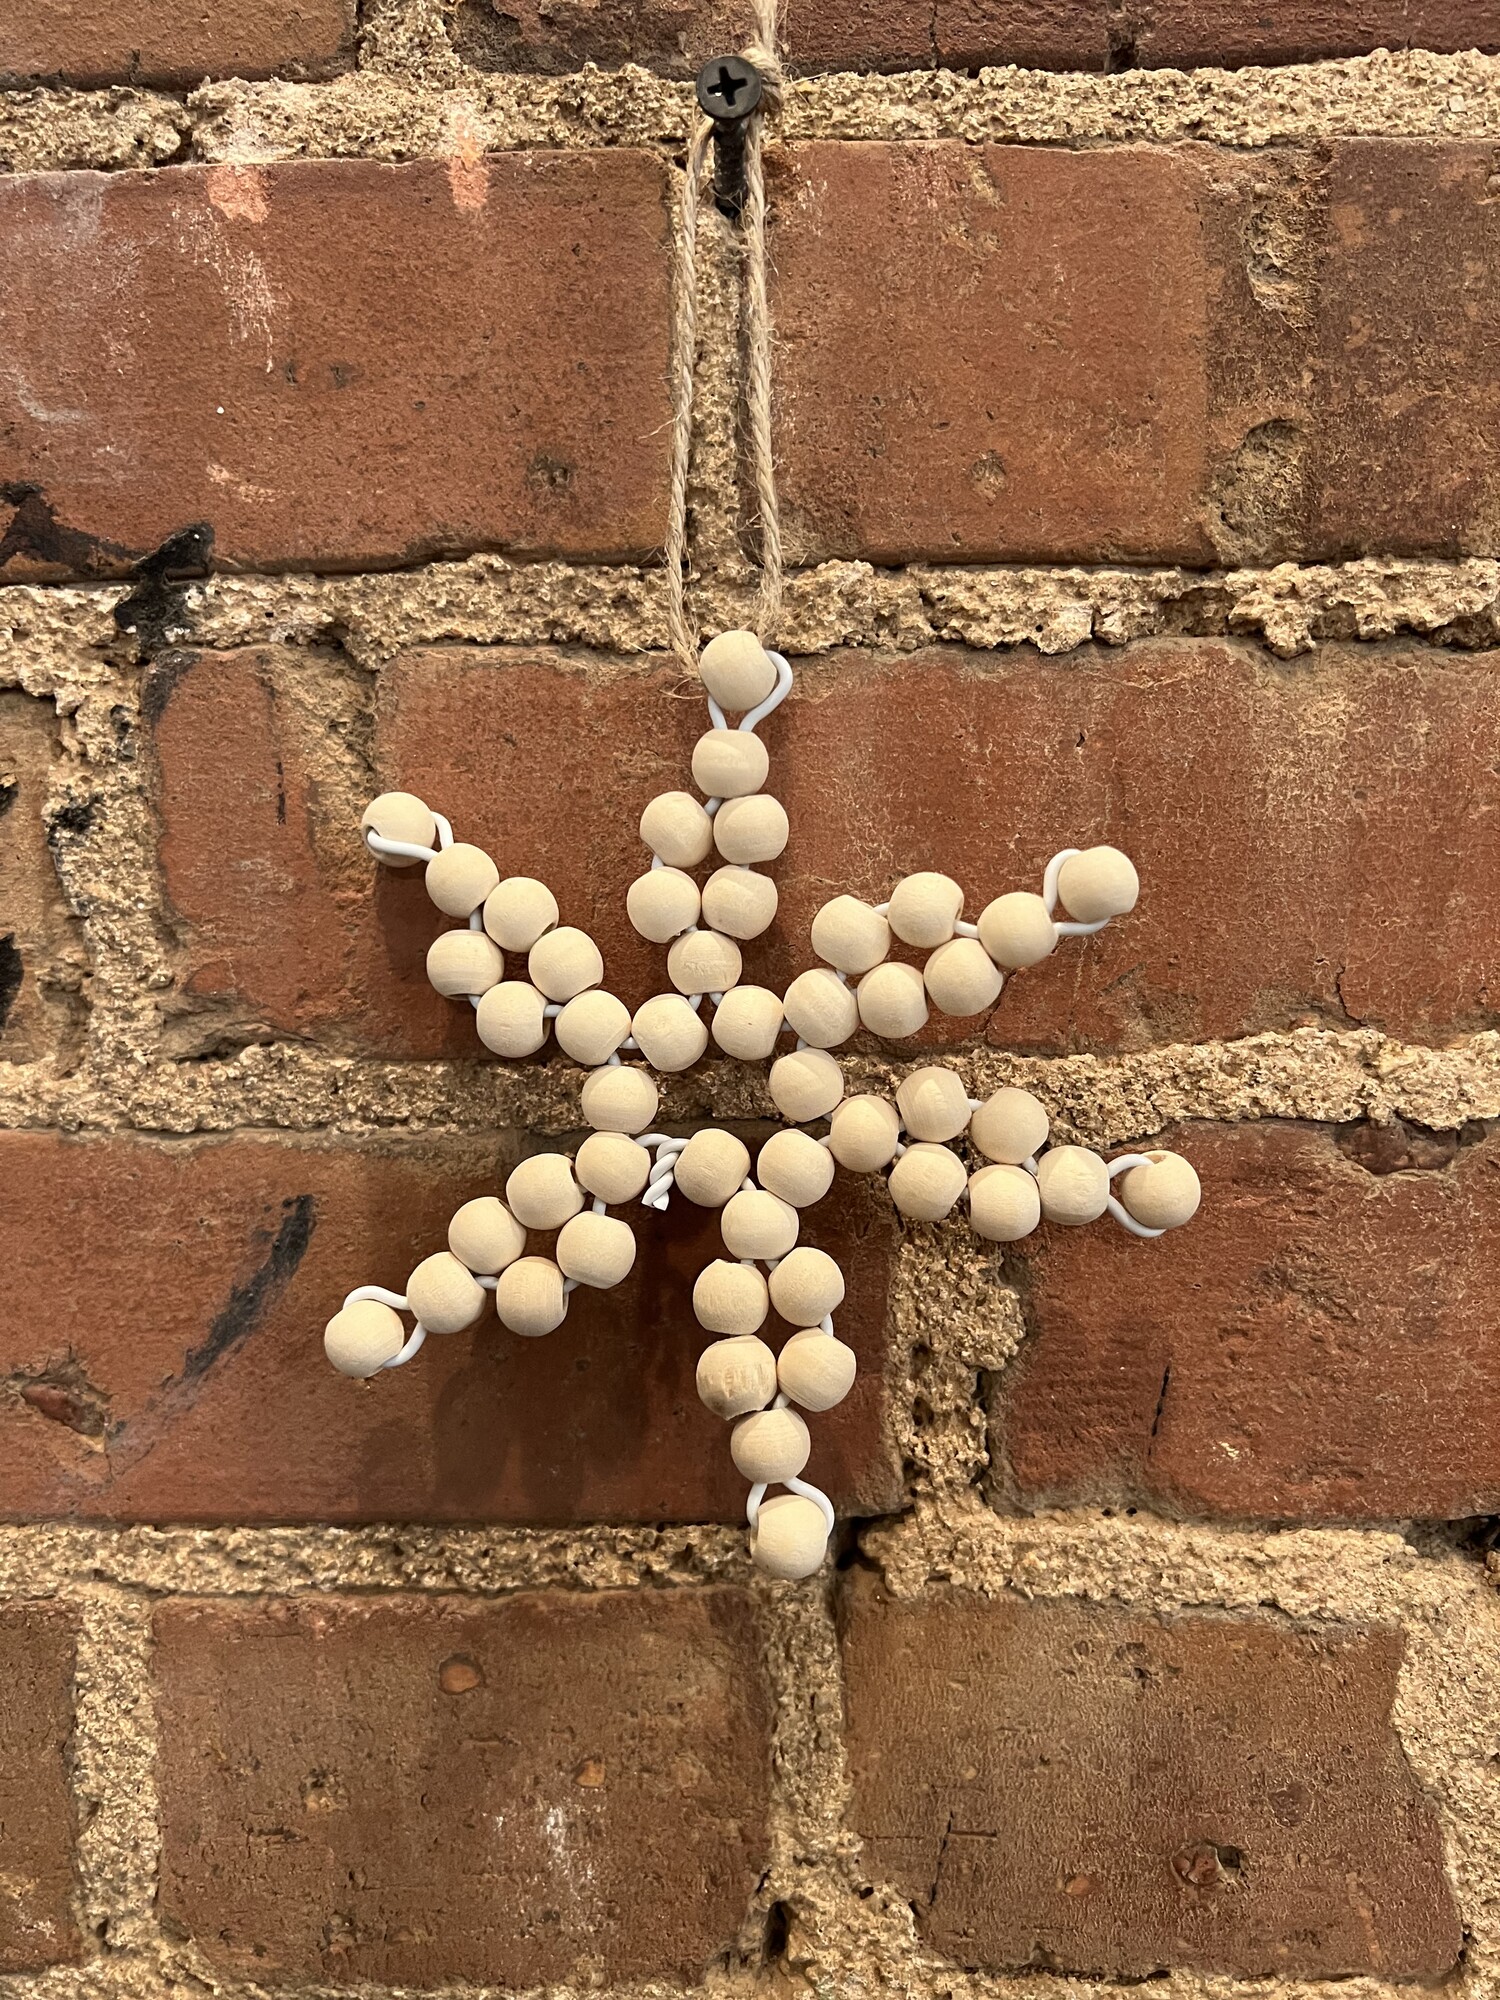 This Bead Snowflake Ornament adds a homemade feel to your tree or other winter decor. The beads are strung on a  white plastic coated wire wrapped into a pretty snowflake shape. They are topped with a jute hanger for easy hanging on your tree or hanging from garland
Measures 5 inches high and 4 inches wide